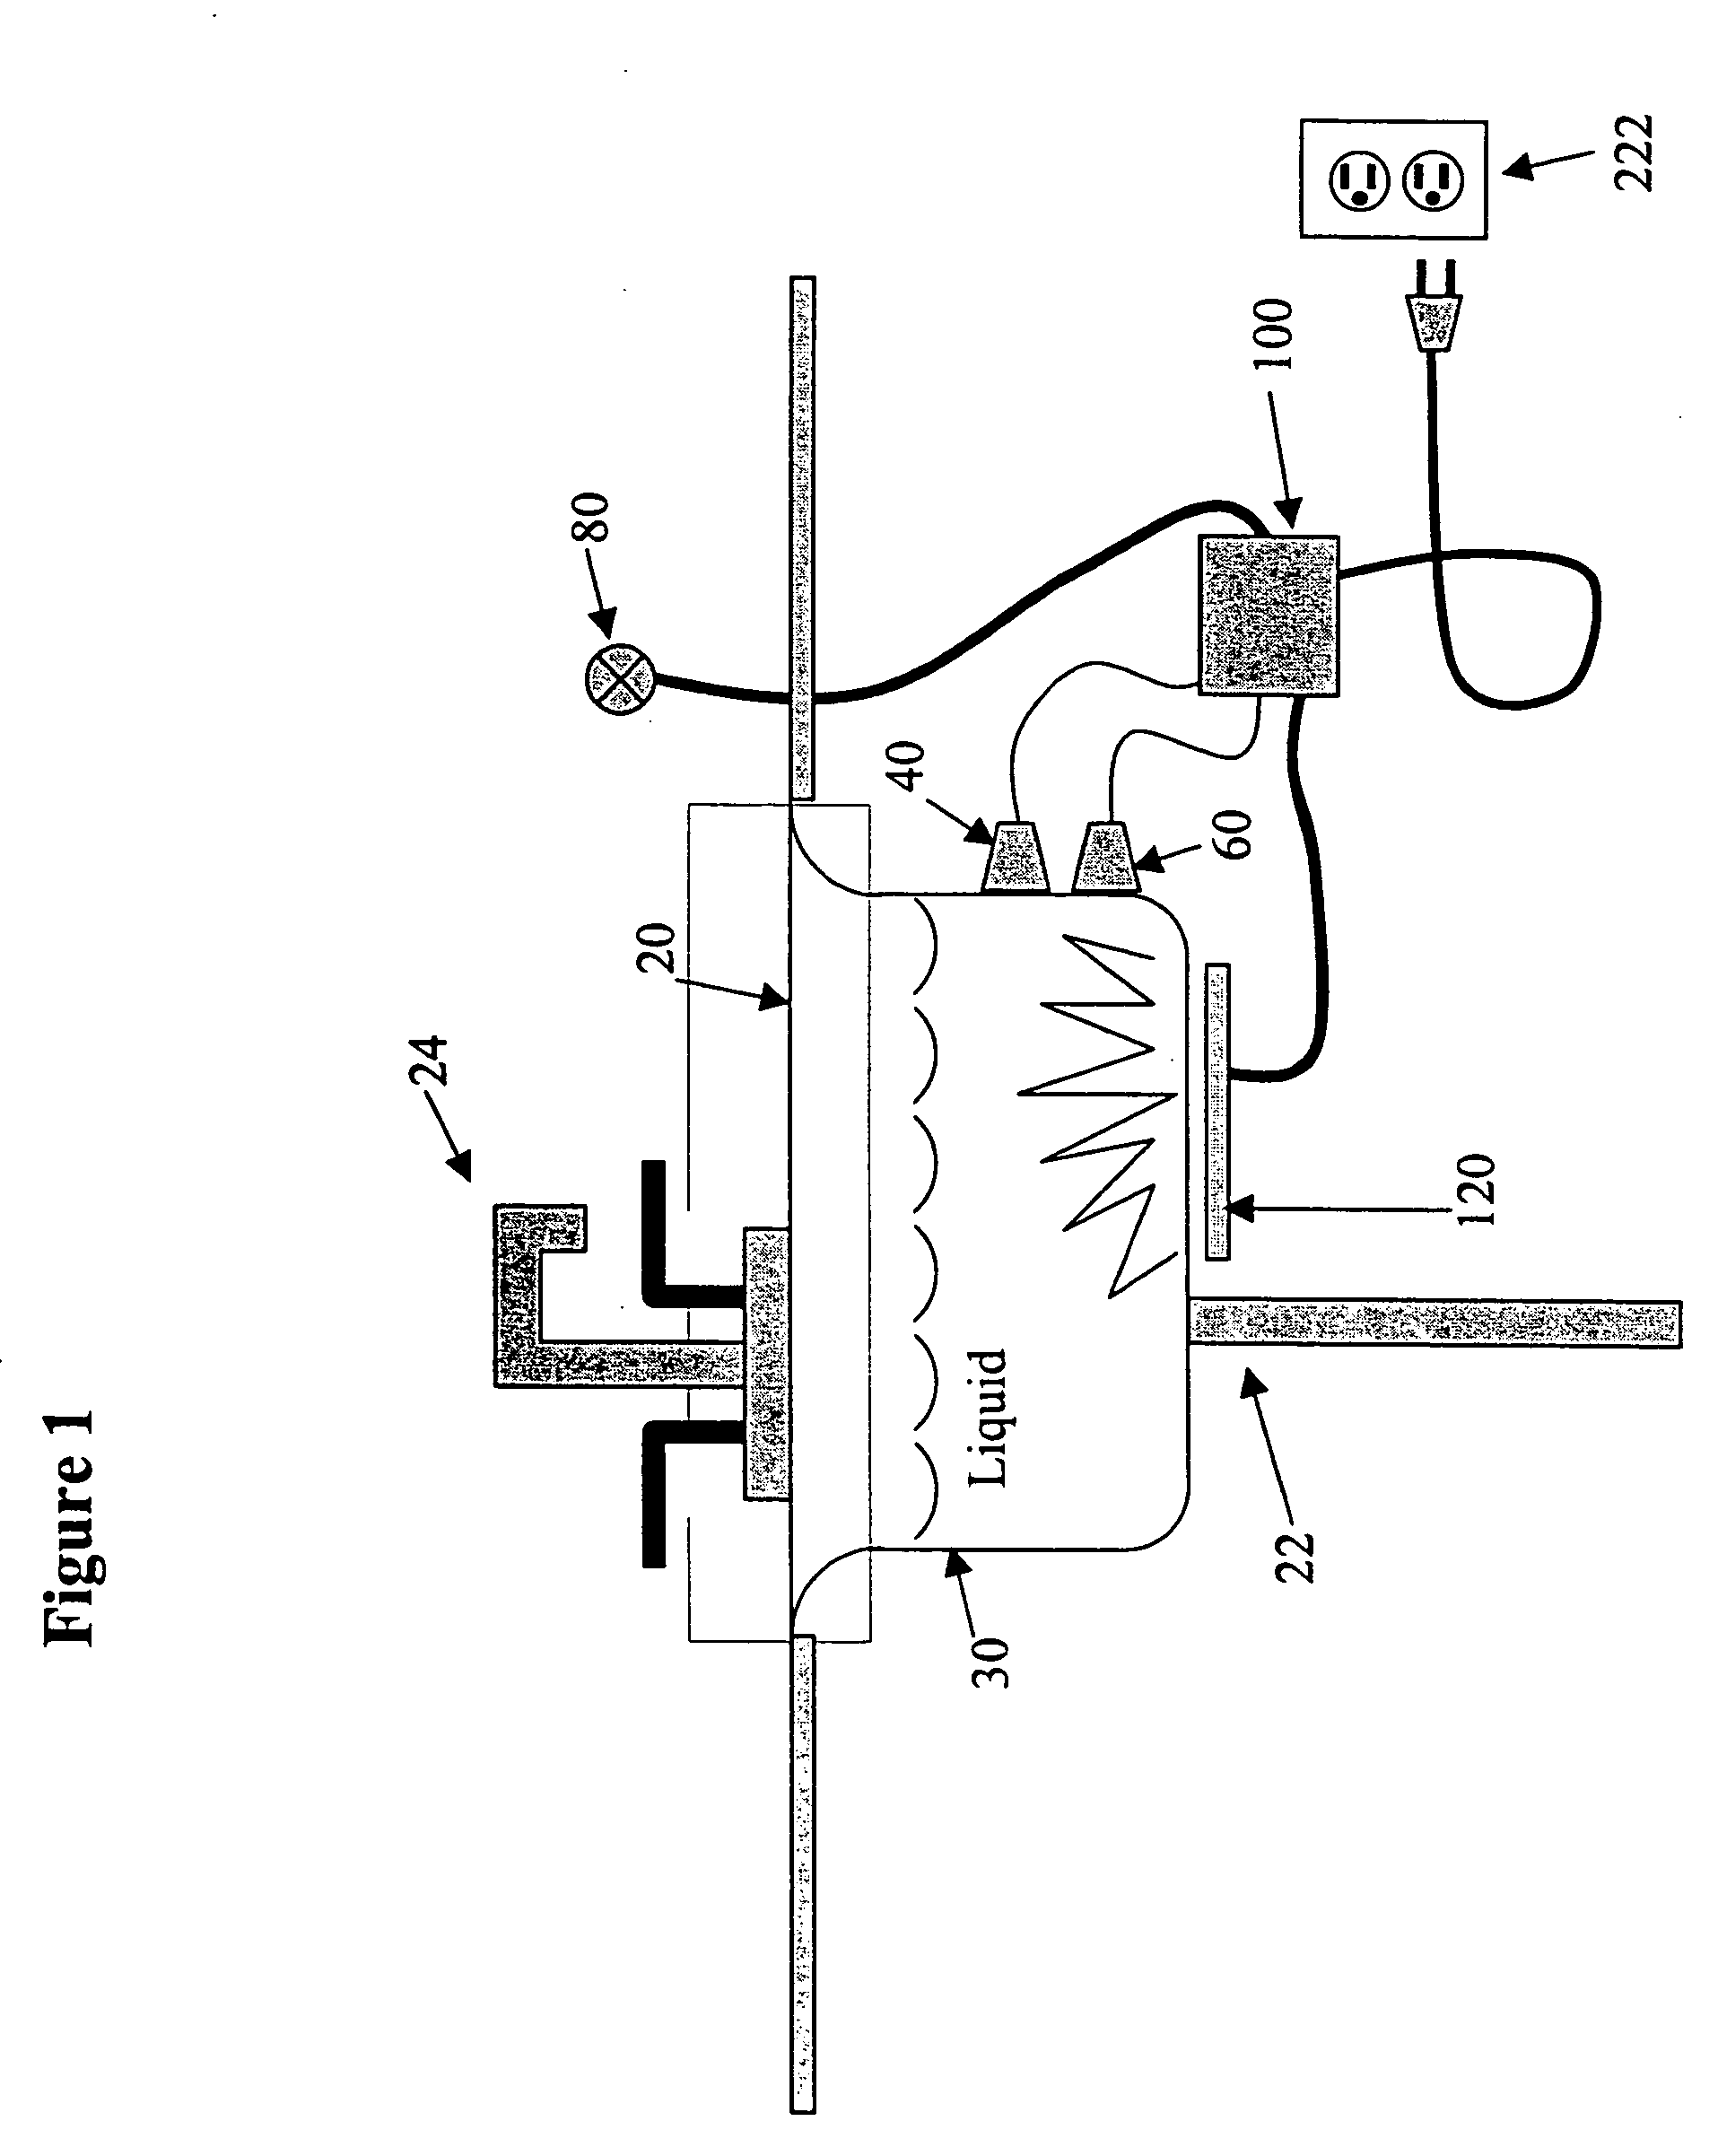 Apparatus for controlling the temperature of the water in a kitchen sink